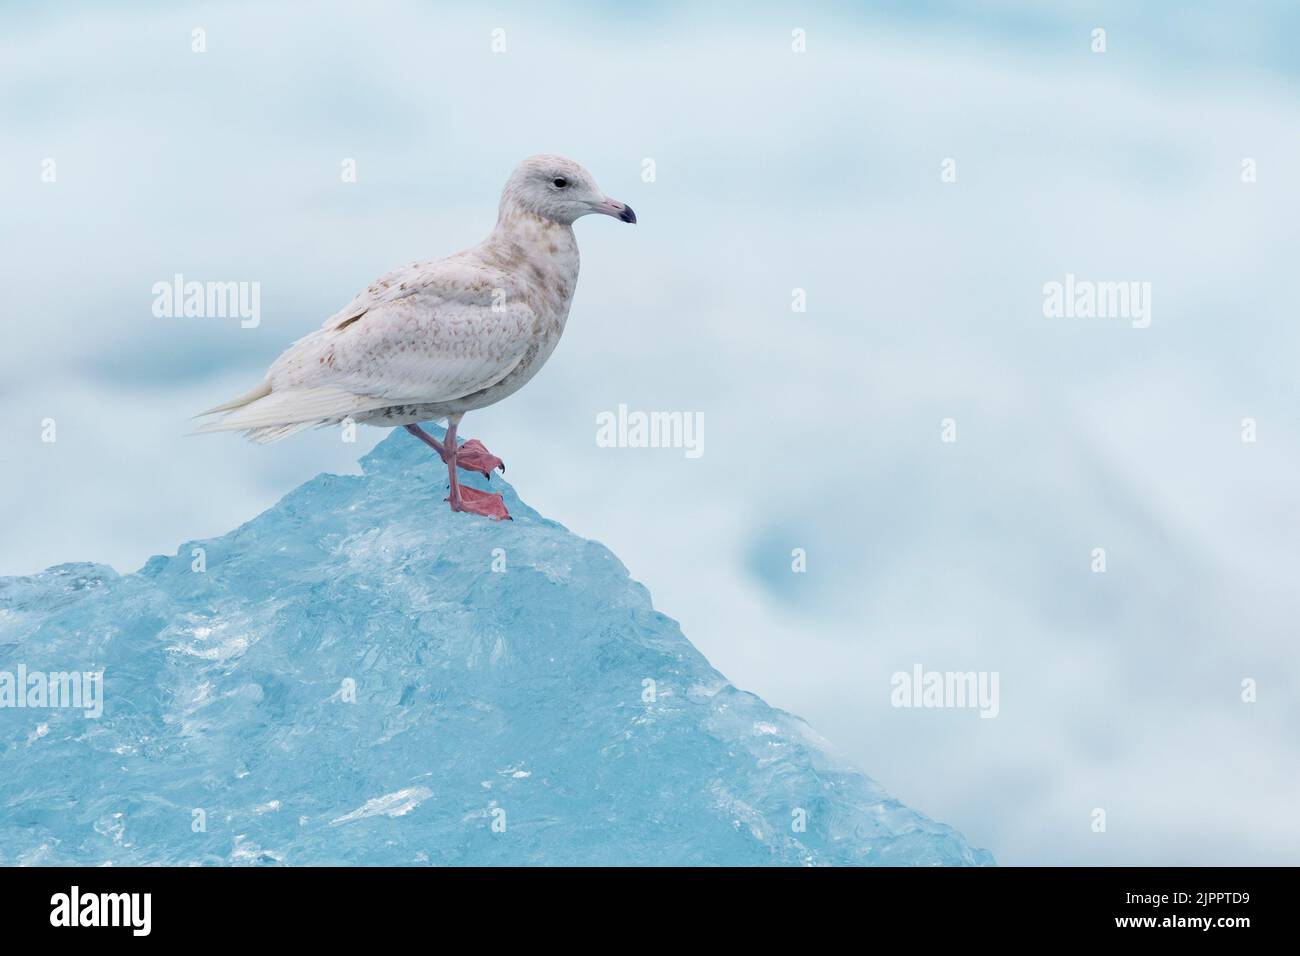 Glaucous Gull (Larus hyperboreus leuceretes), side view of a juvenile standing on an iceberg, Western Region, Iceland Stock Photo